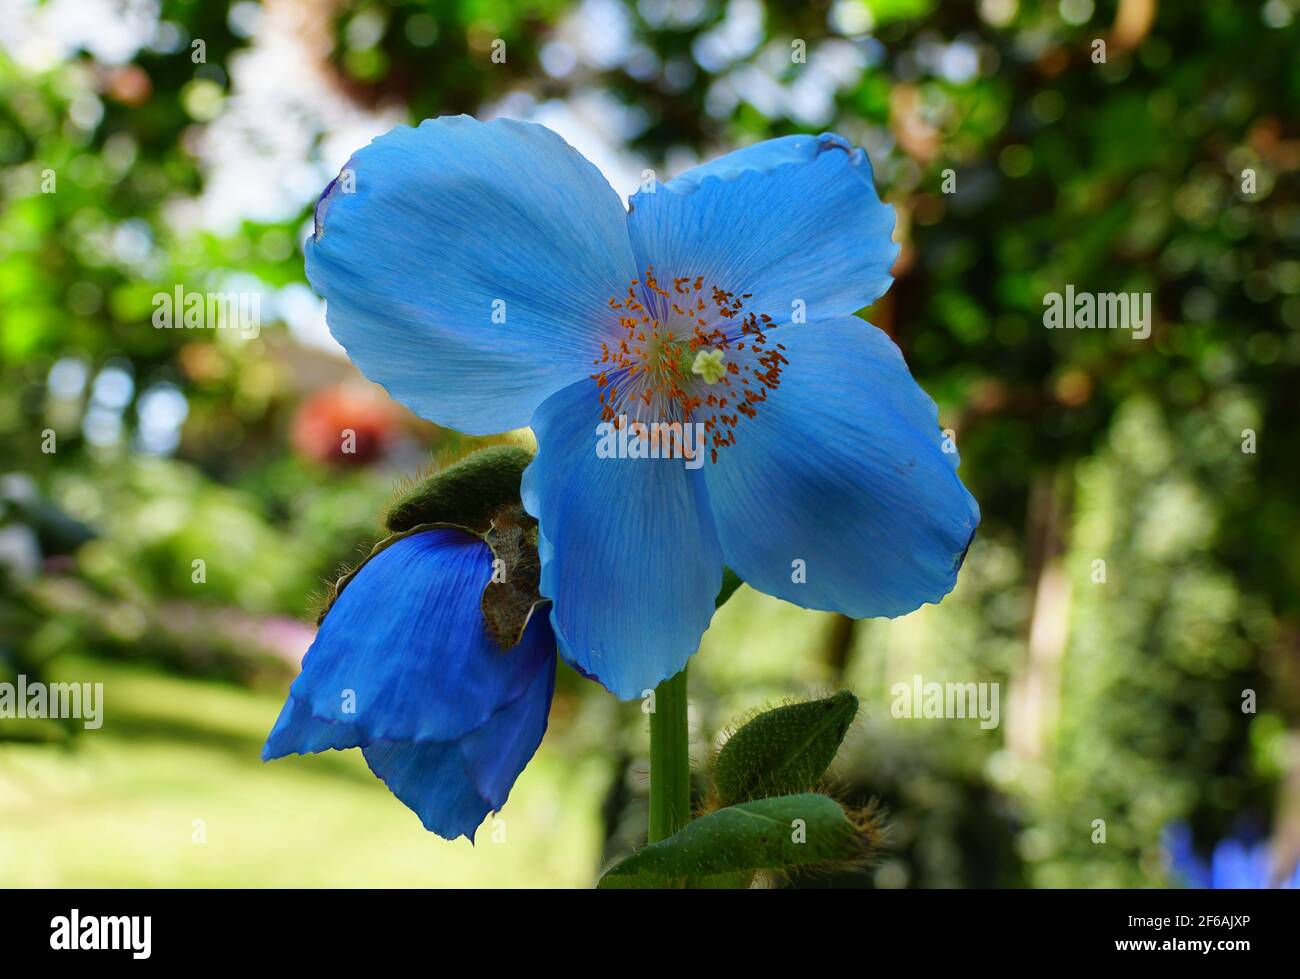 A close up of the beautiful Blue Poppy 'Lingholm' flowers Stock Photo